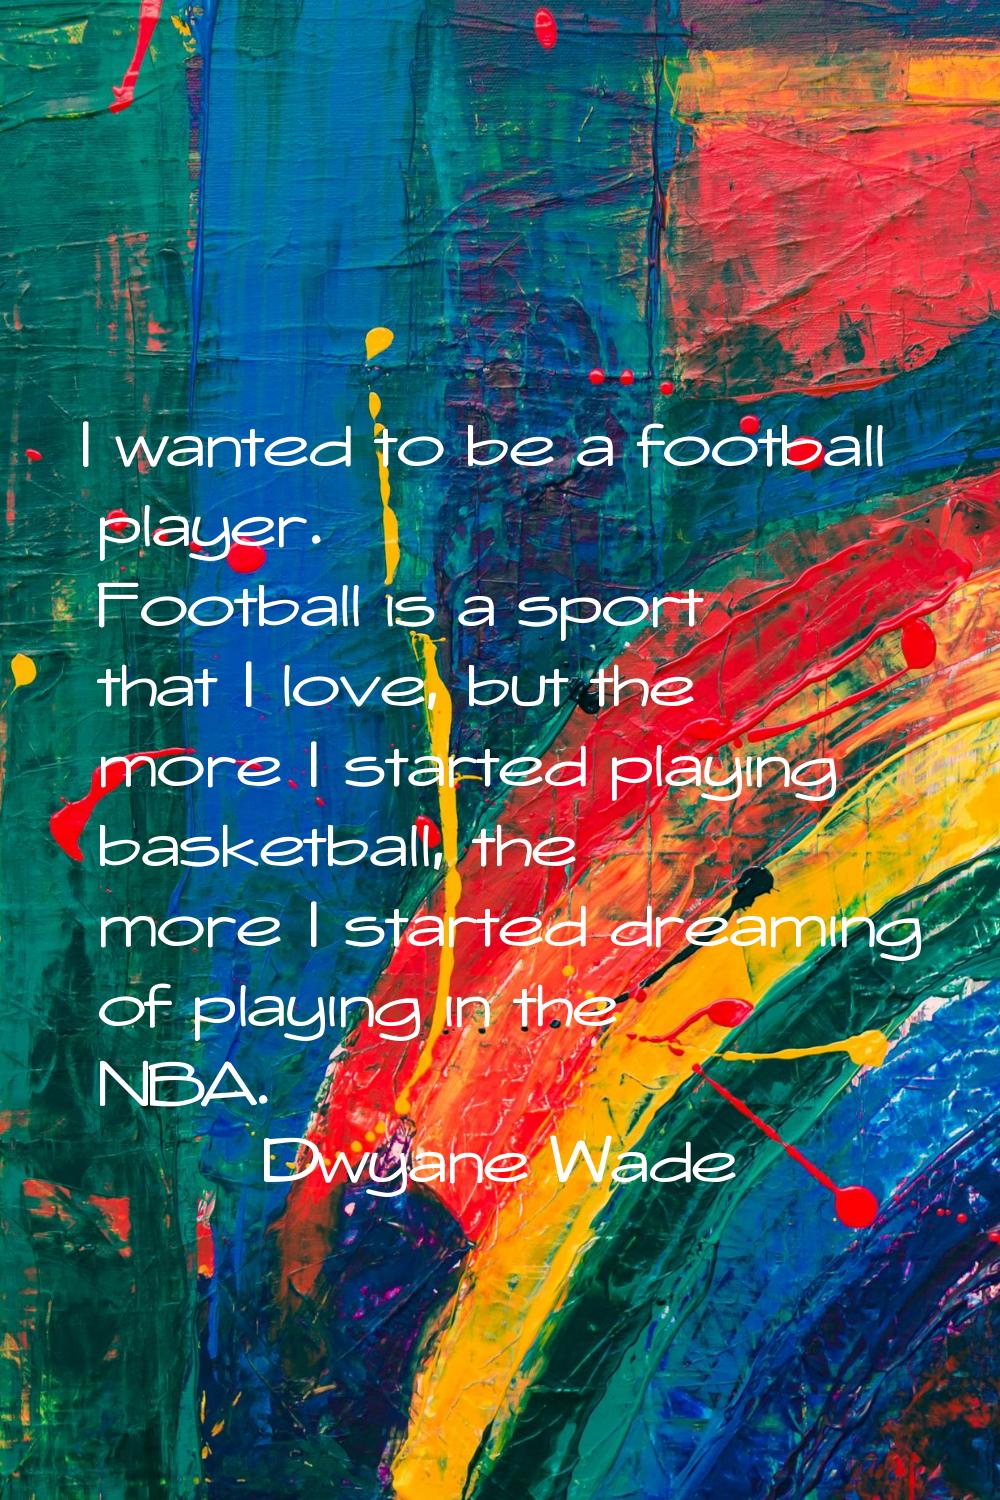 I wanted to be a football player. Football is a sport that I love, but the more I started playing b